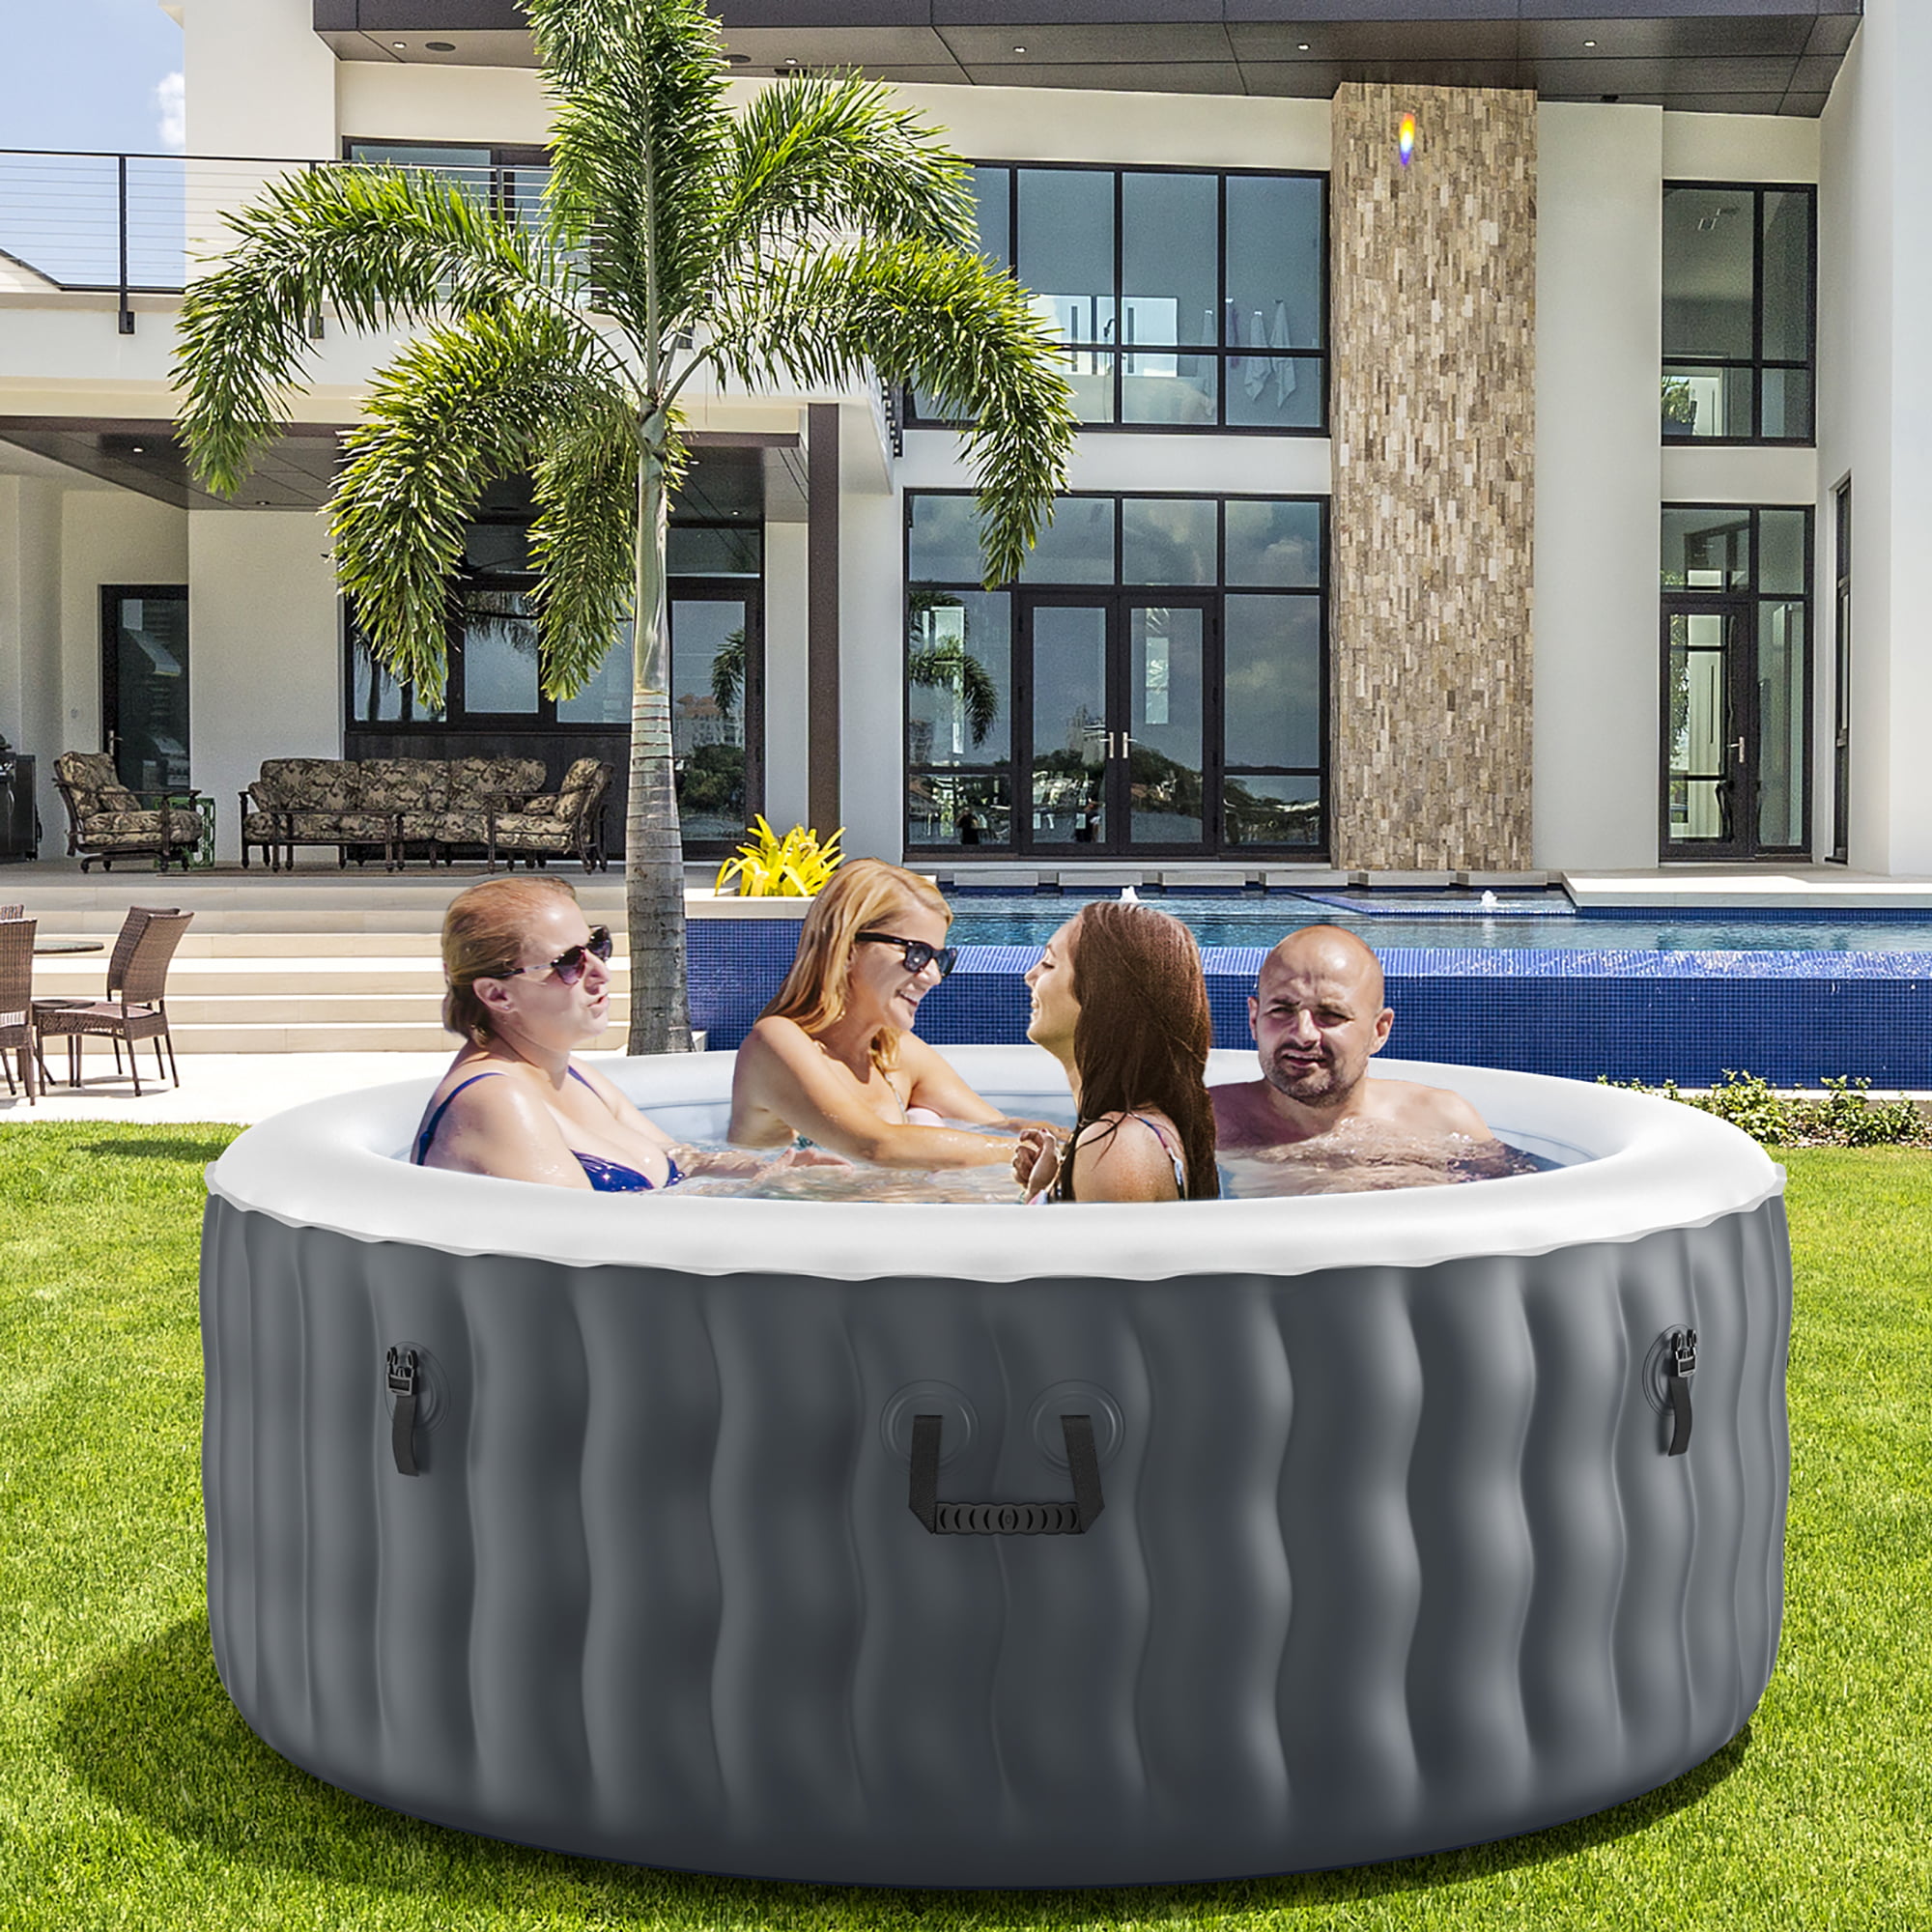 Amazcafe Portable Inflatable Bubble Massage Spa Hot Tub 4 Person Relaxing Outdoor 